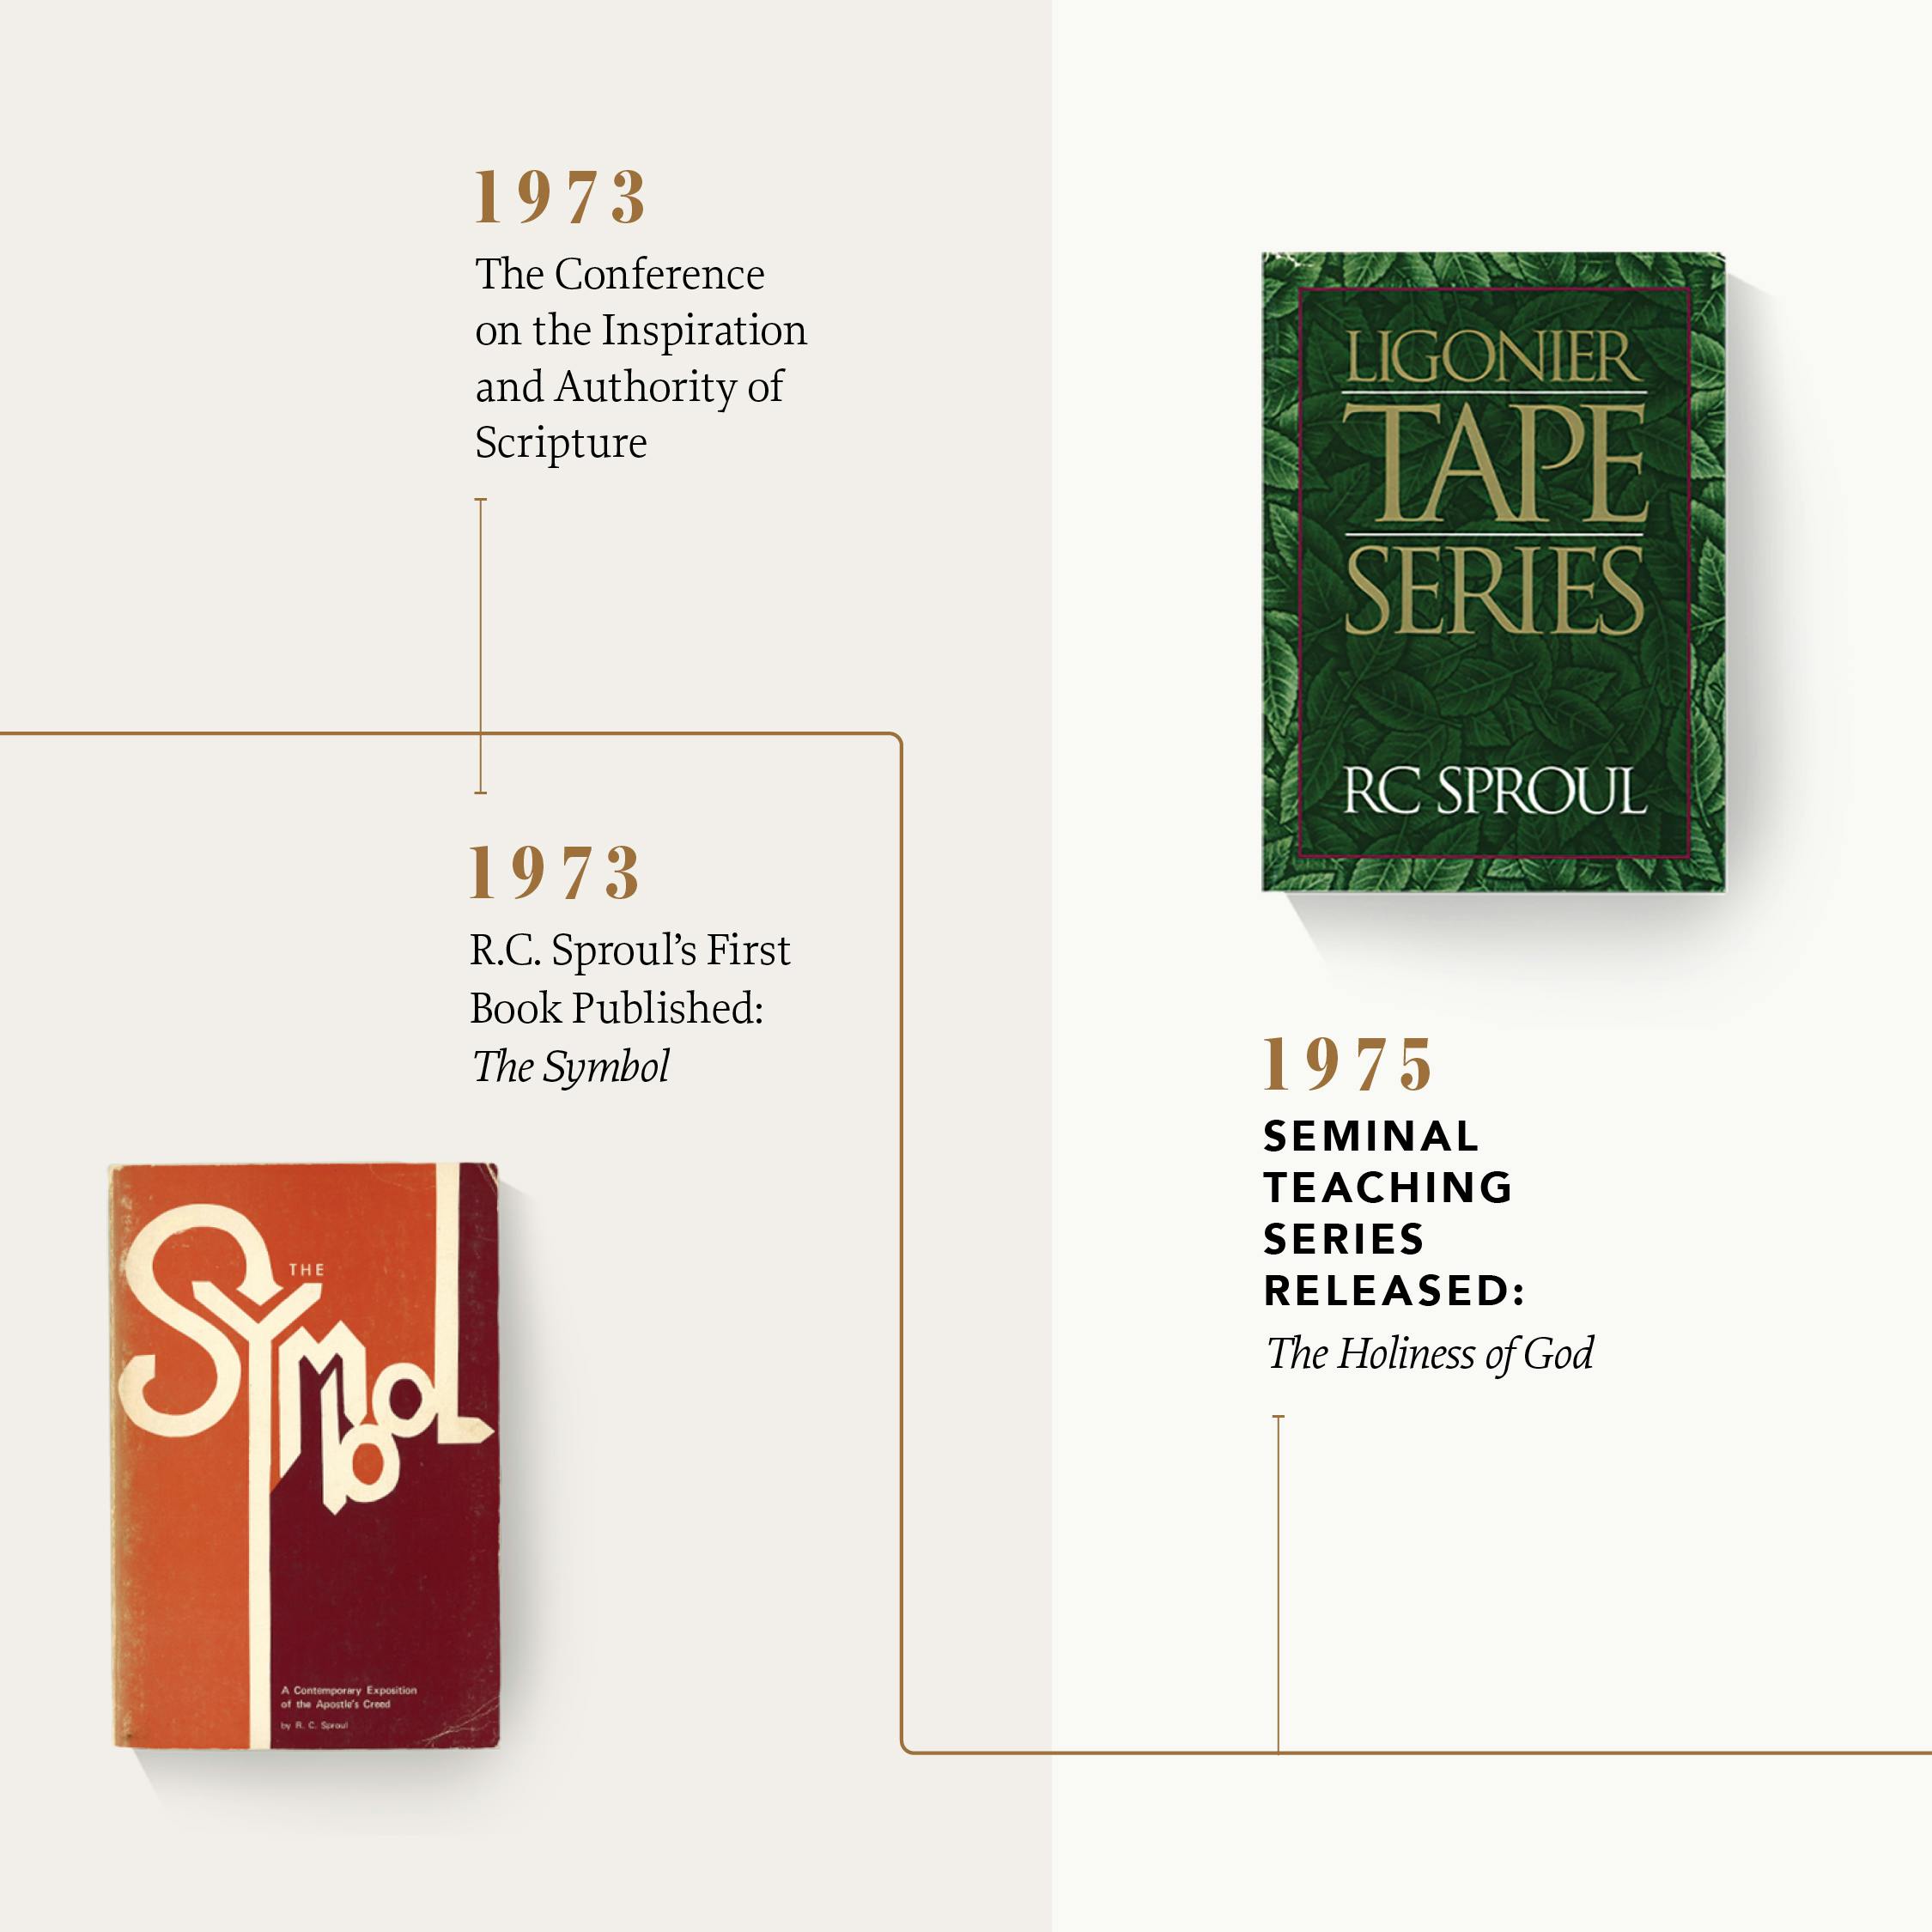 1973 :: The Conference on the Inspiration and Authority of Scripture occurred :: 1973 :: R.C. Sproul's first book The Symbol published :: 1975 :: The Holiness of God teaching series released